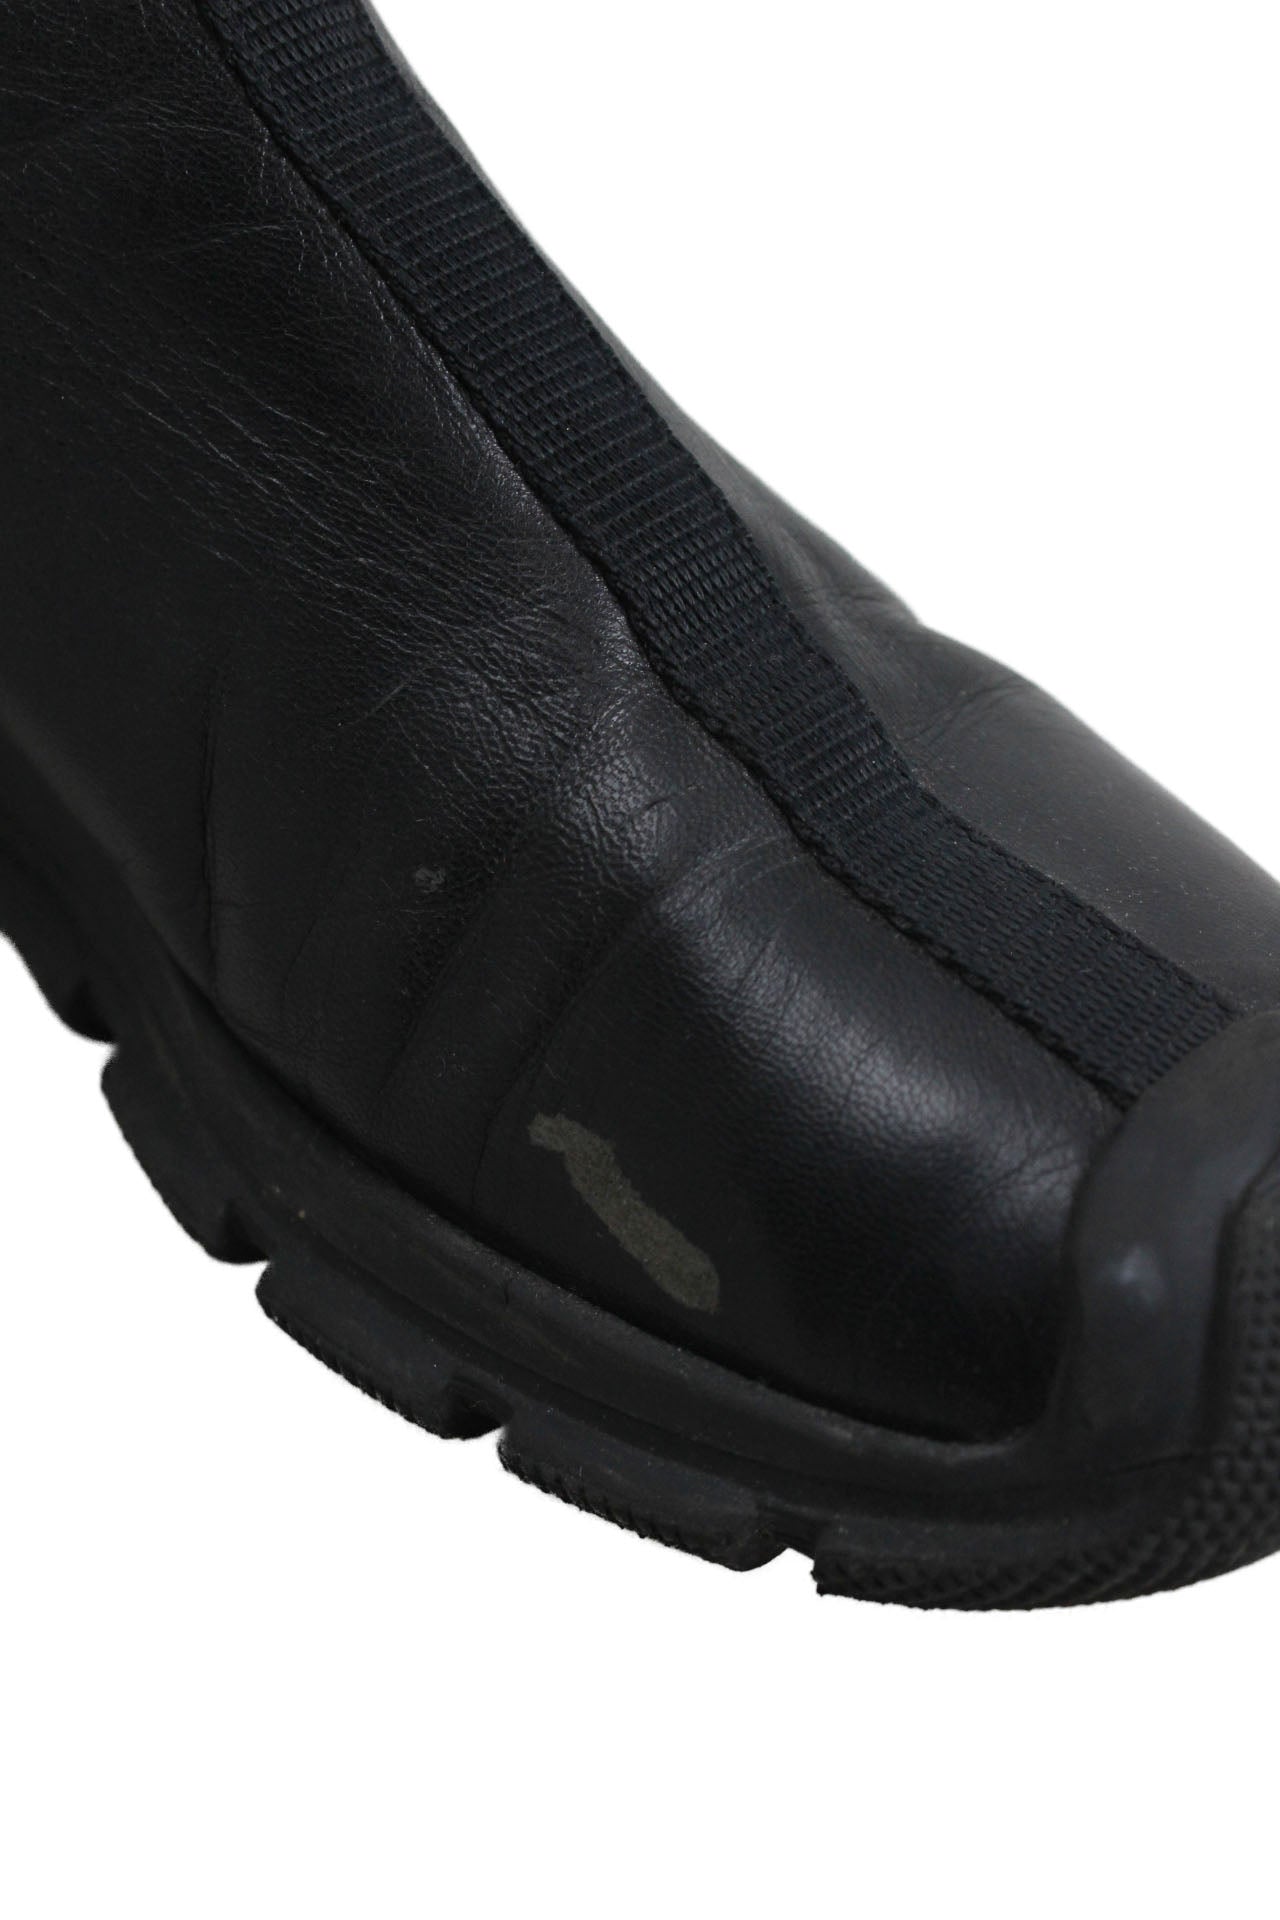 minor scuff at inside of left boot at upper leather